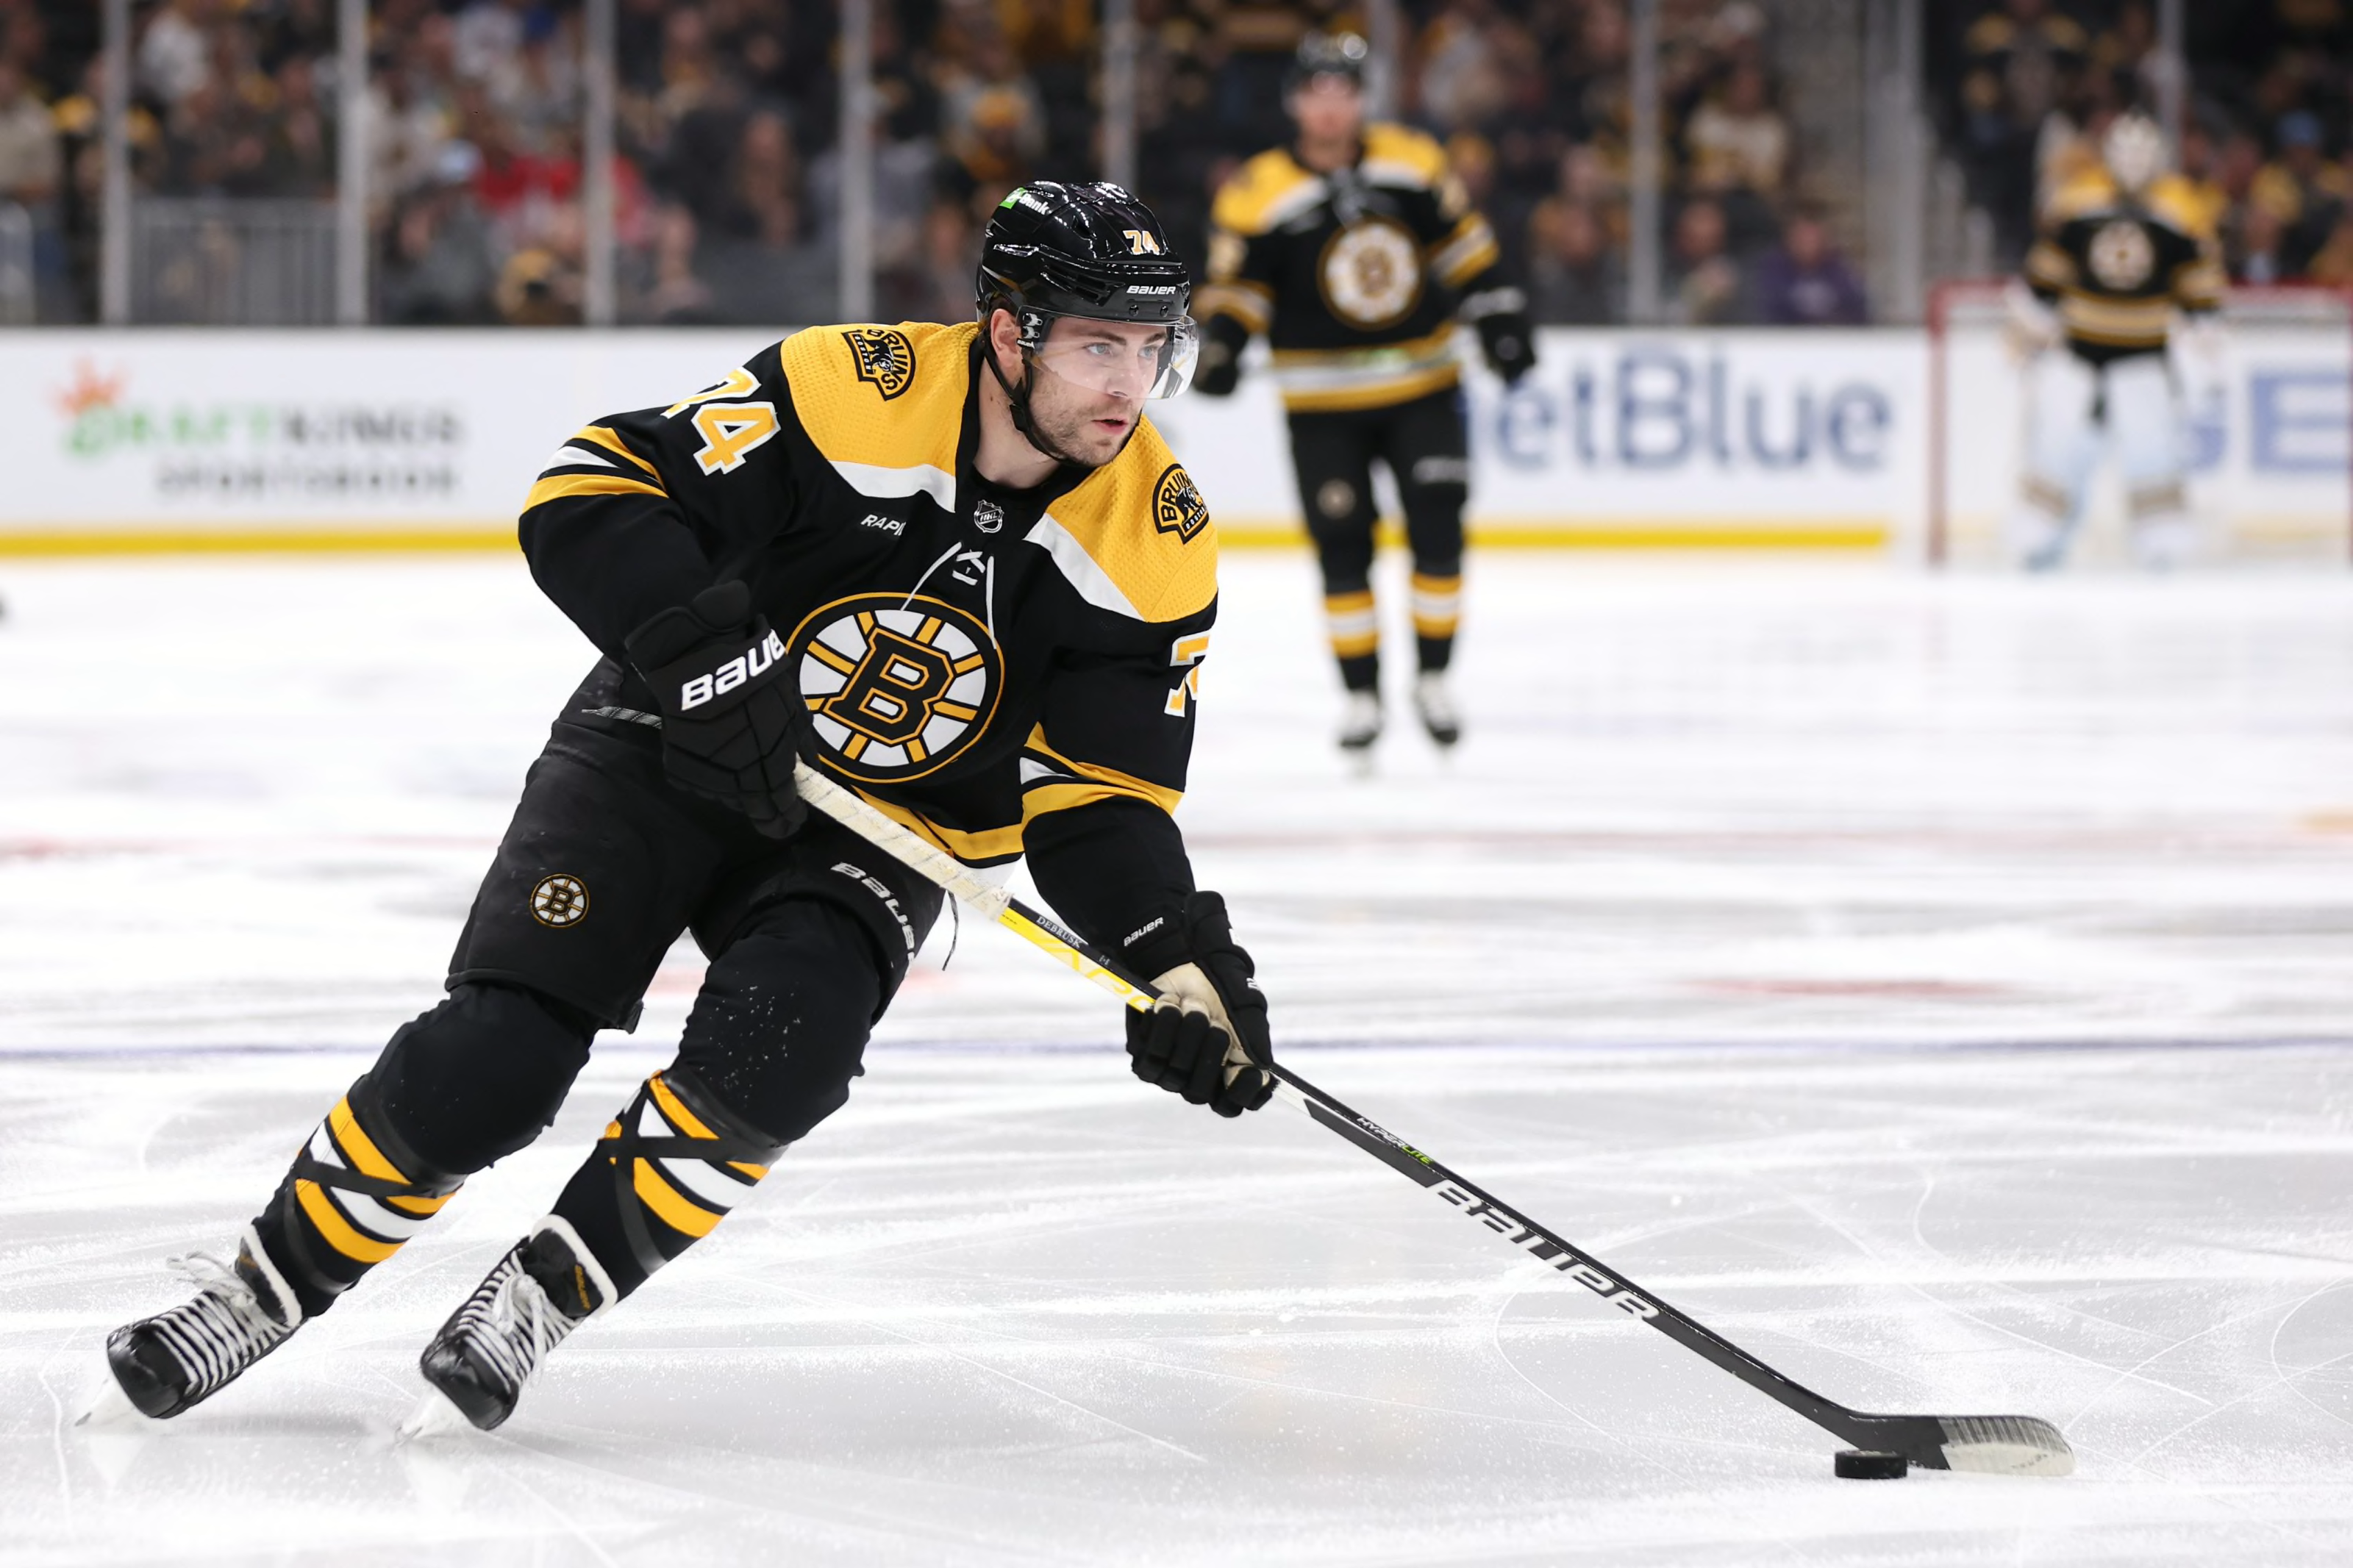 Jake DeBrusk expresses desire to stay with Boston Bruins and aims for 30- goal season - BVM Sports